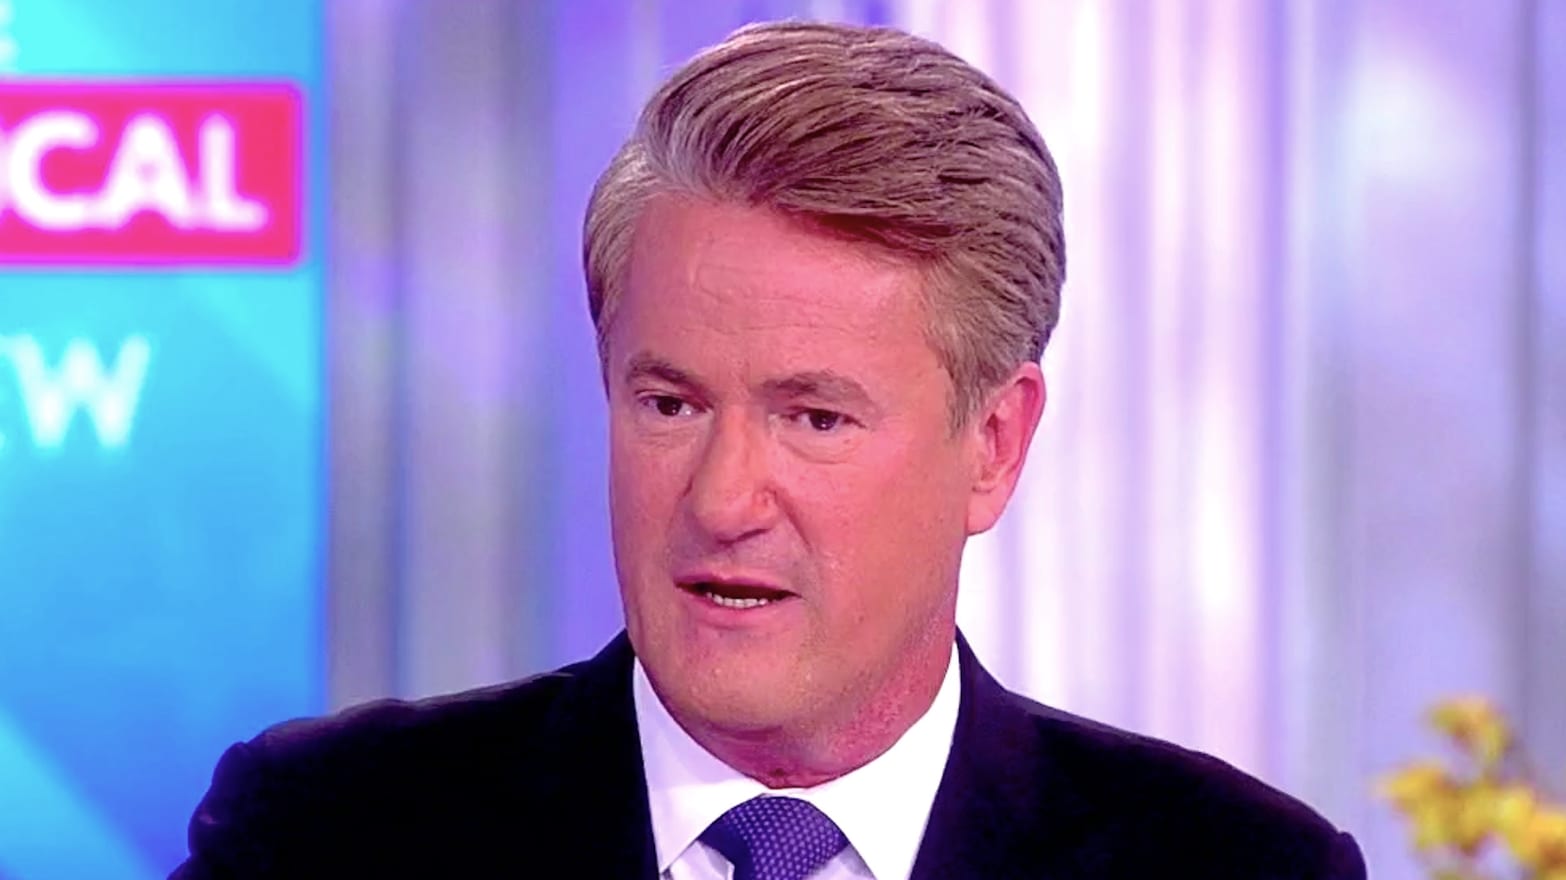 Joe Scarborough's Blonde Hair: How It Reflects His Political Views - wide 5